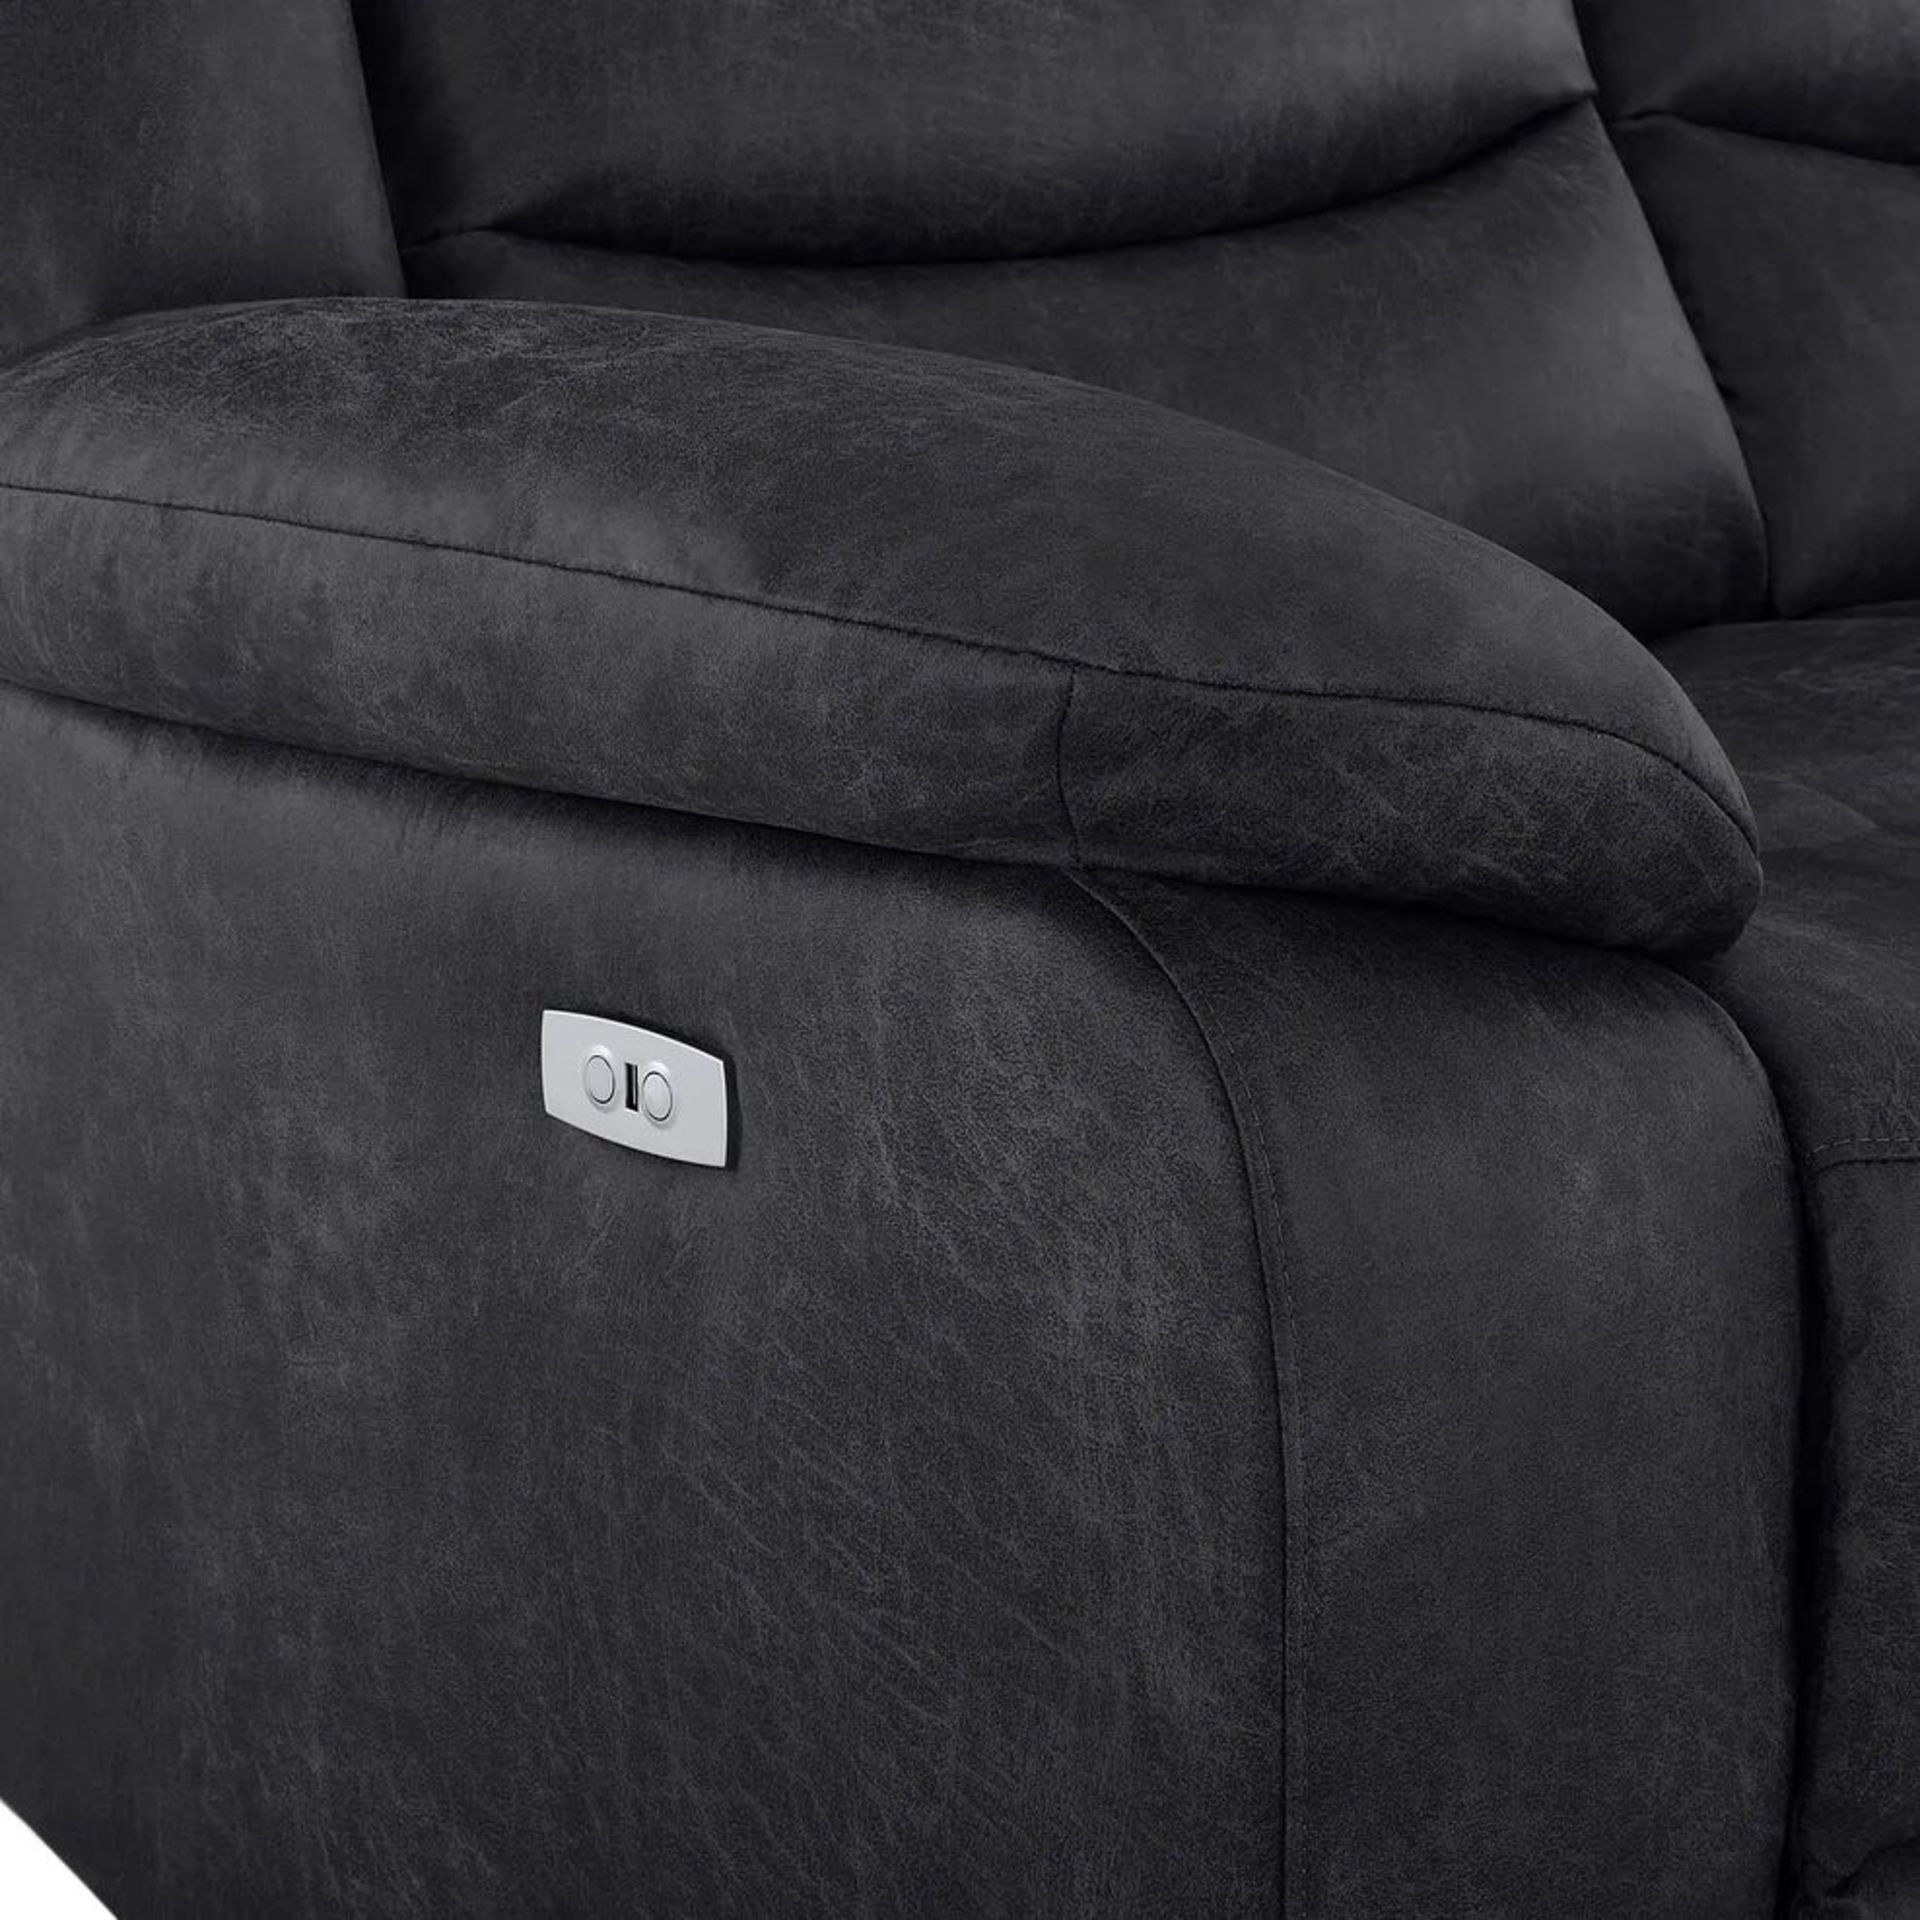 BRAND NEW MARLOW 3 Seater Electric Recliner Sofa - MILLER GREY FABRIC. RRP £1199. Designed to suit - Image 9 of 12